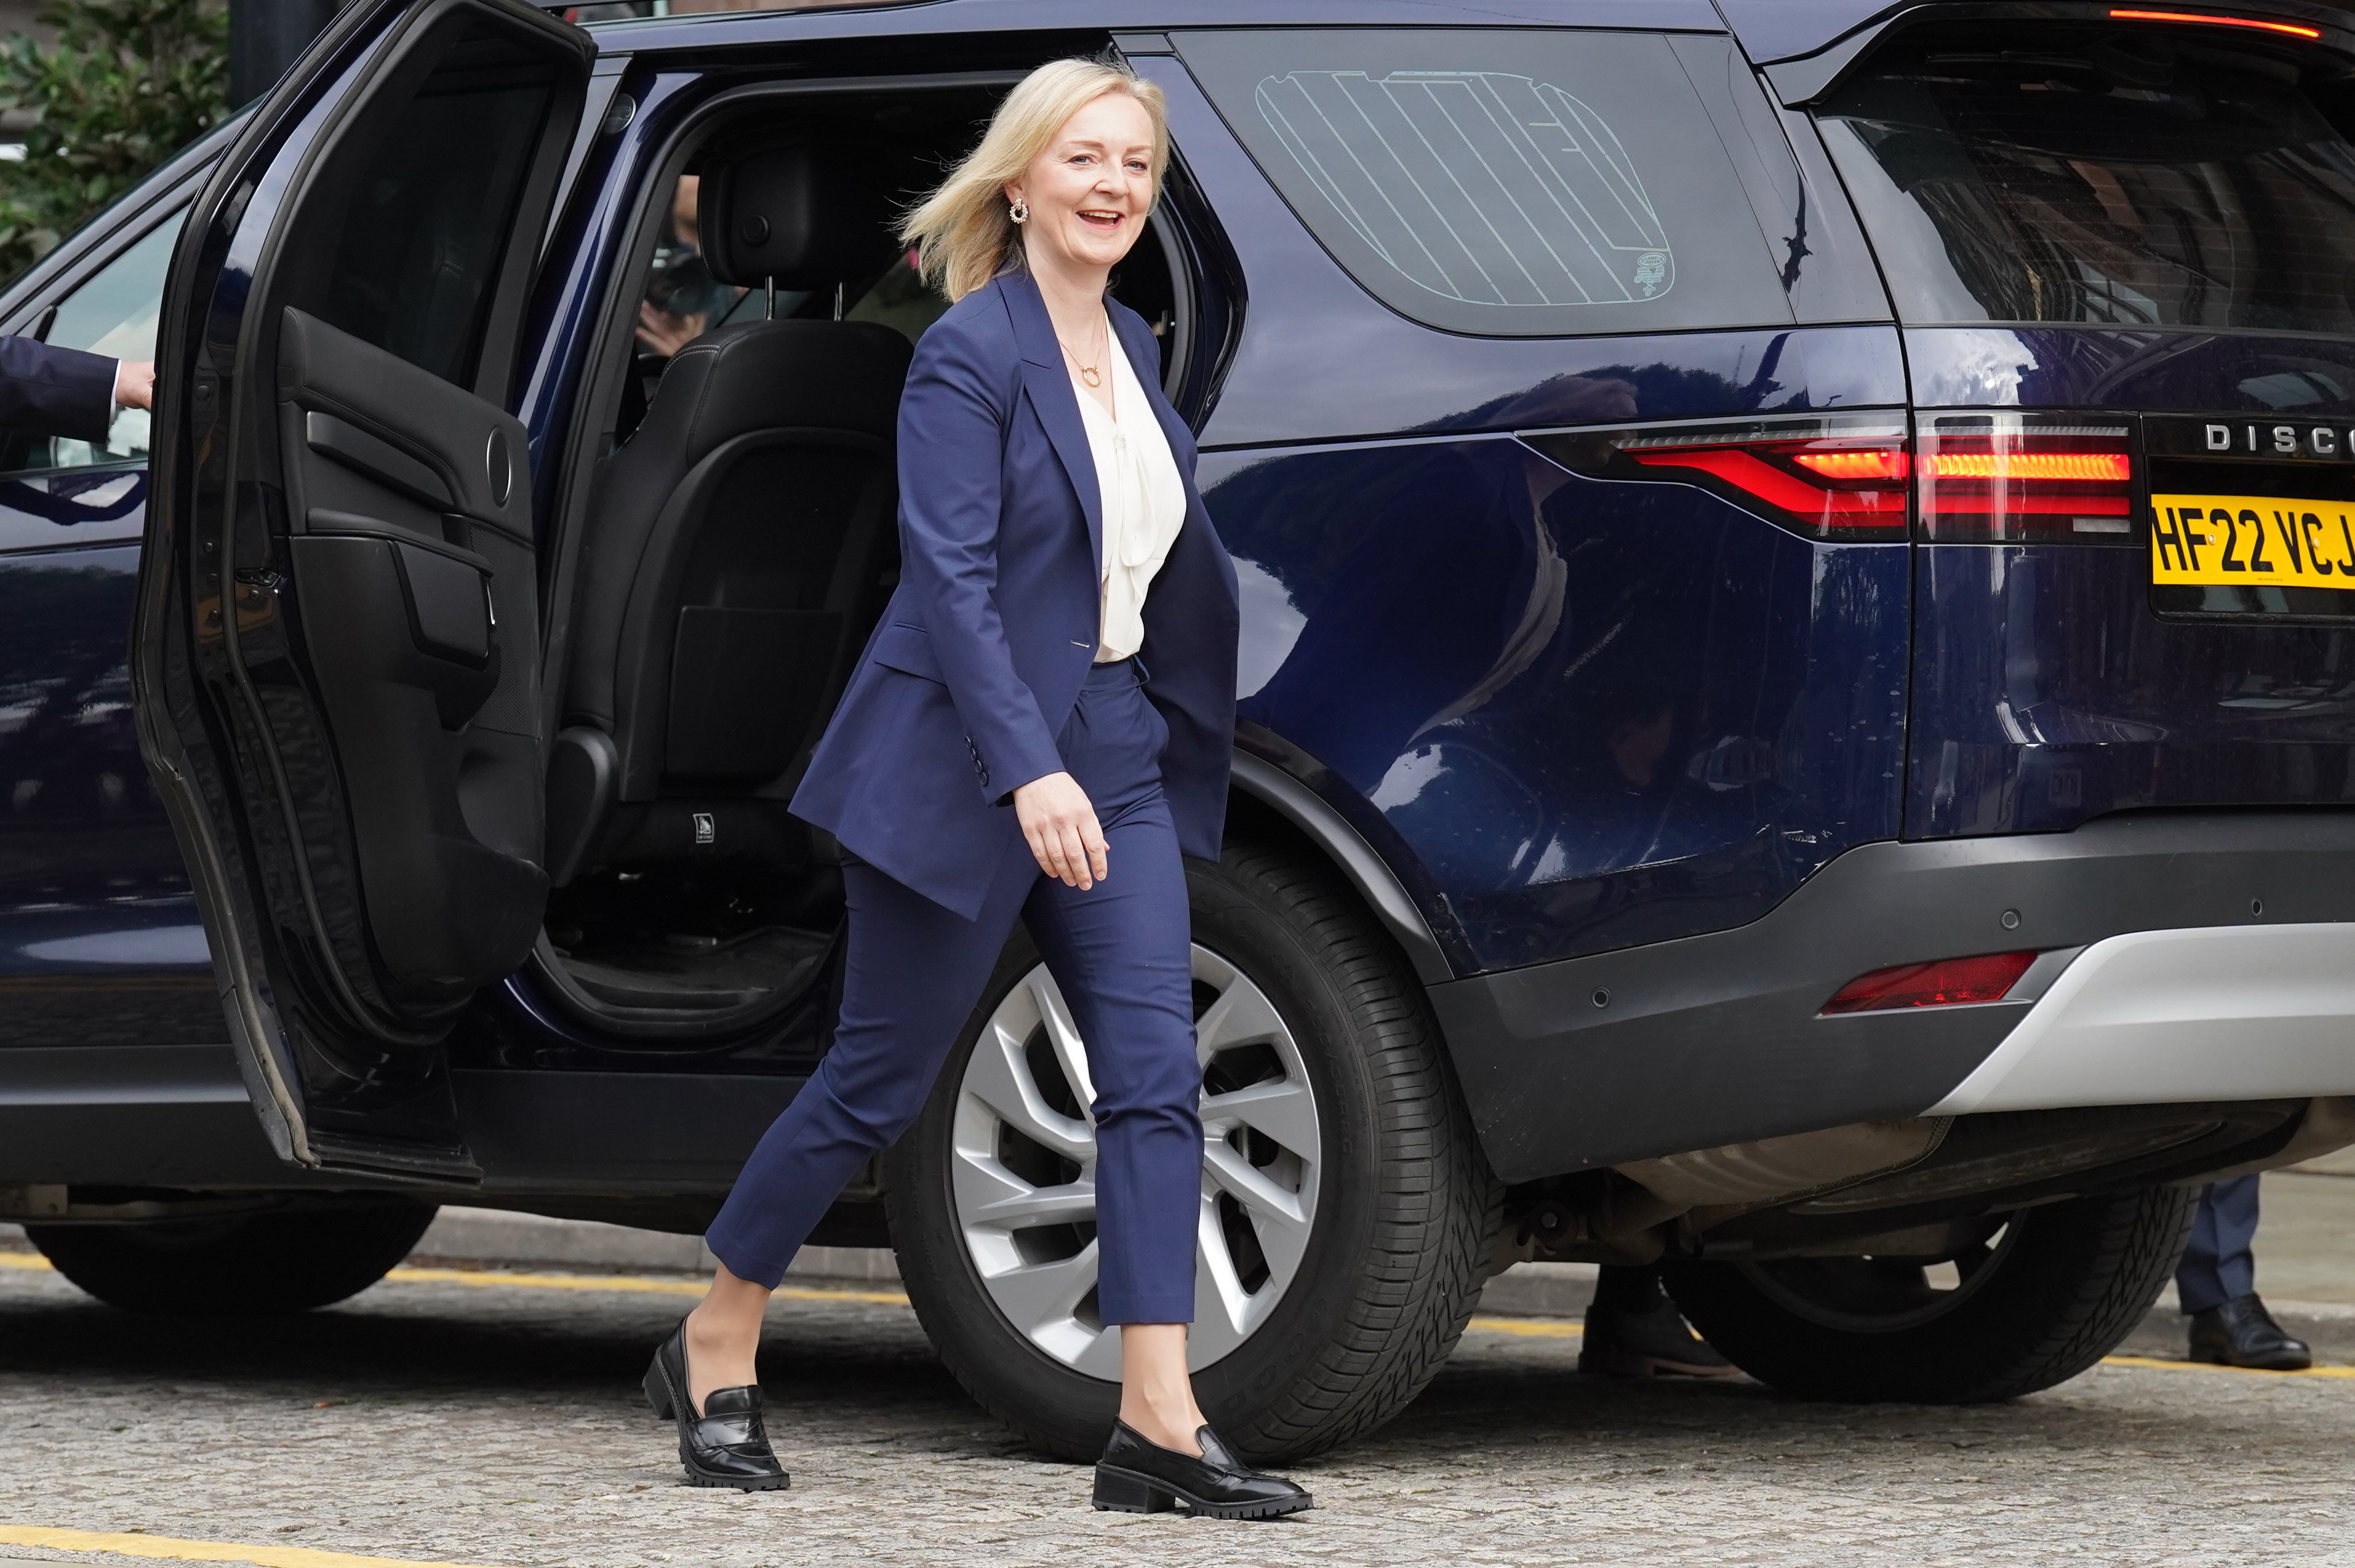 The tagline for Liz Truss’s conference rally was ‘Make Britain Grow Again’